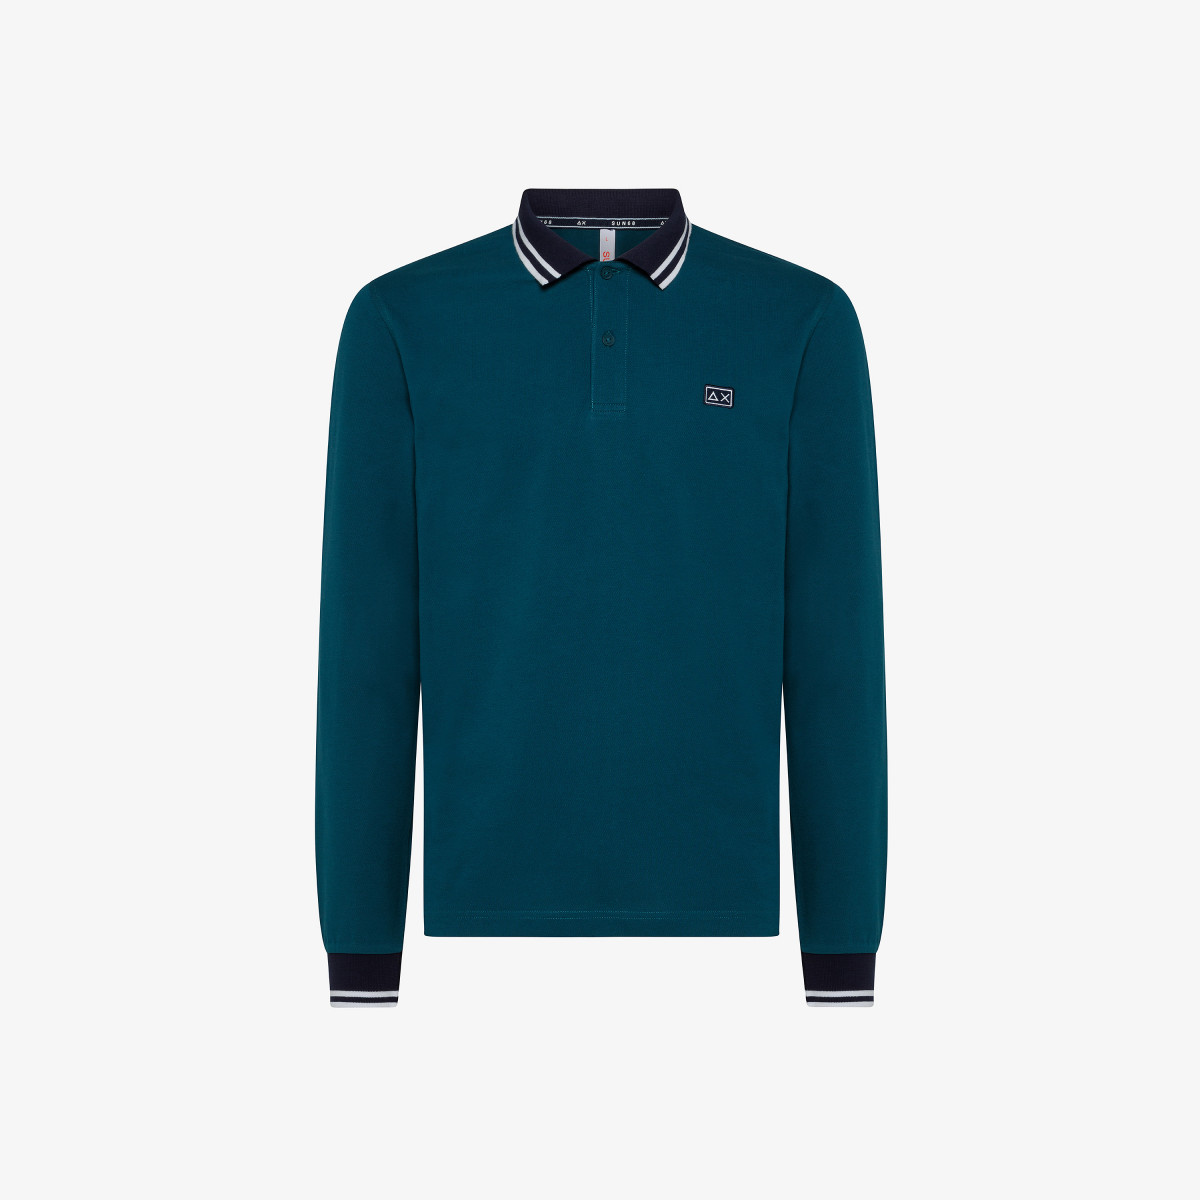 POLO STRIPES ON PLACKET AND CUFFS EL. L/S GREEN EMERALD